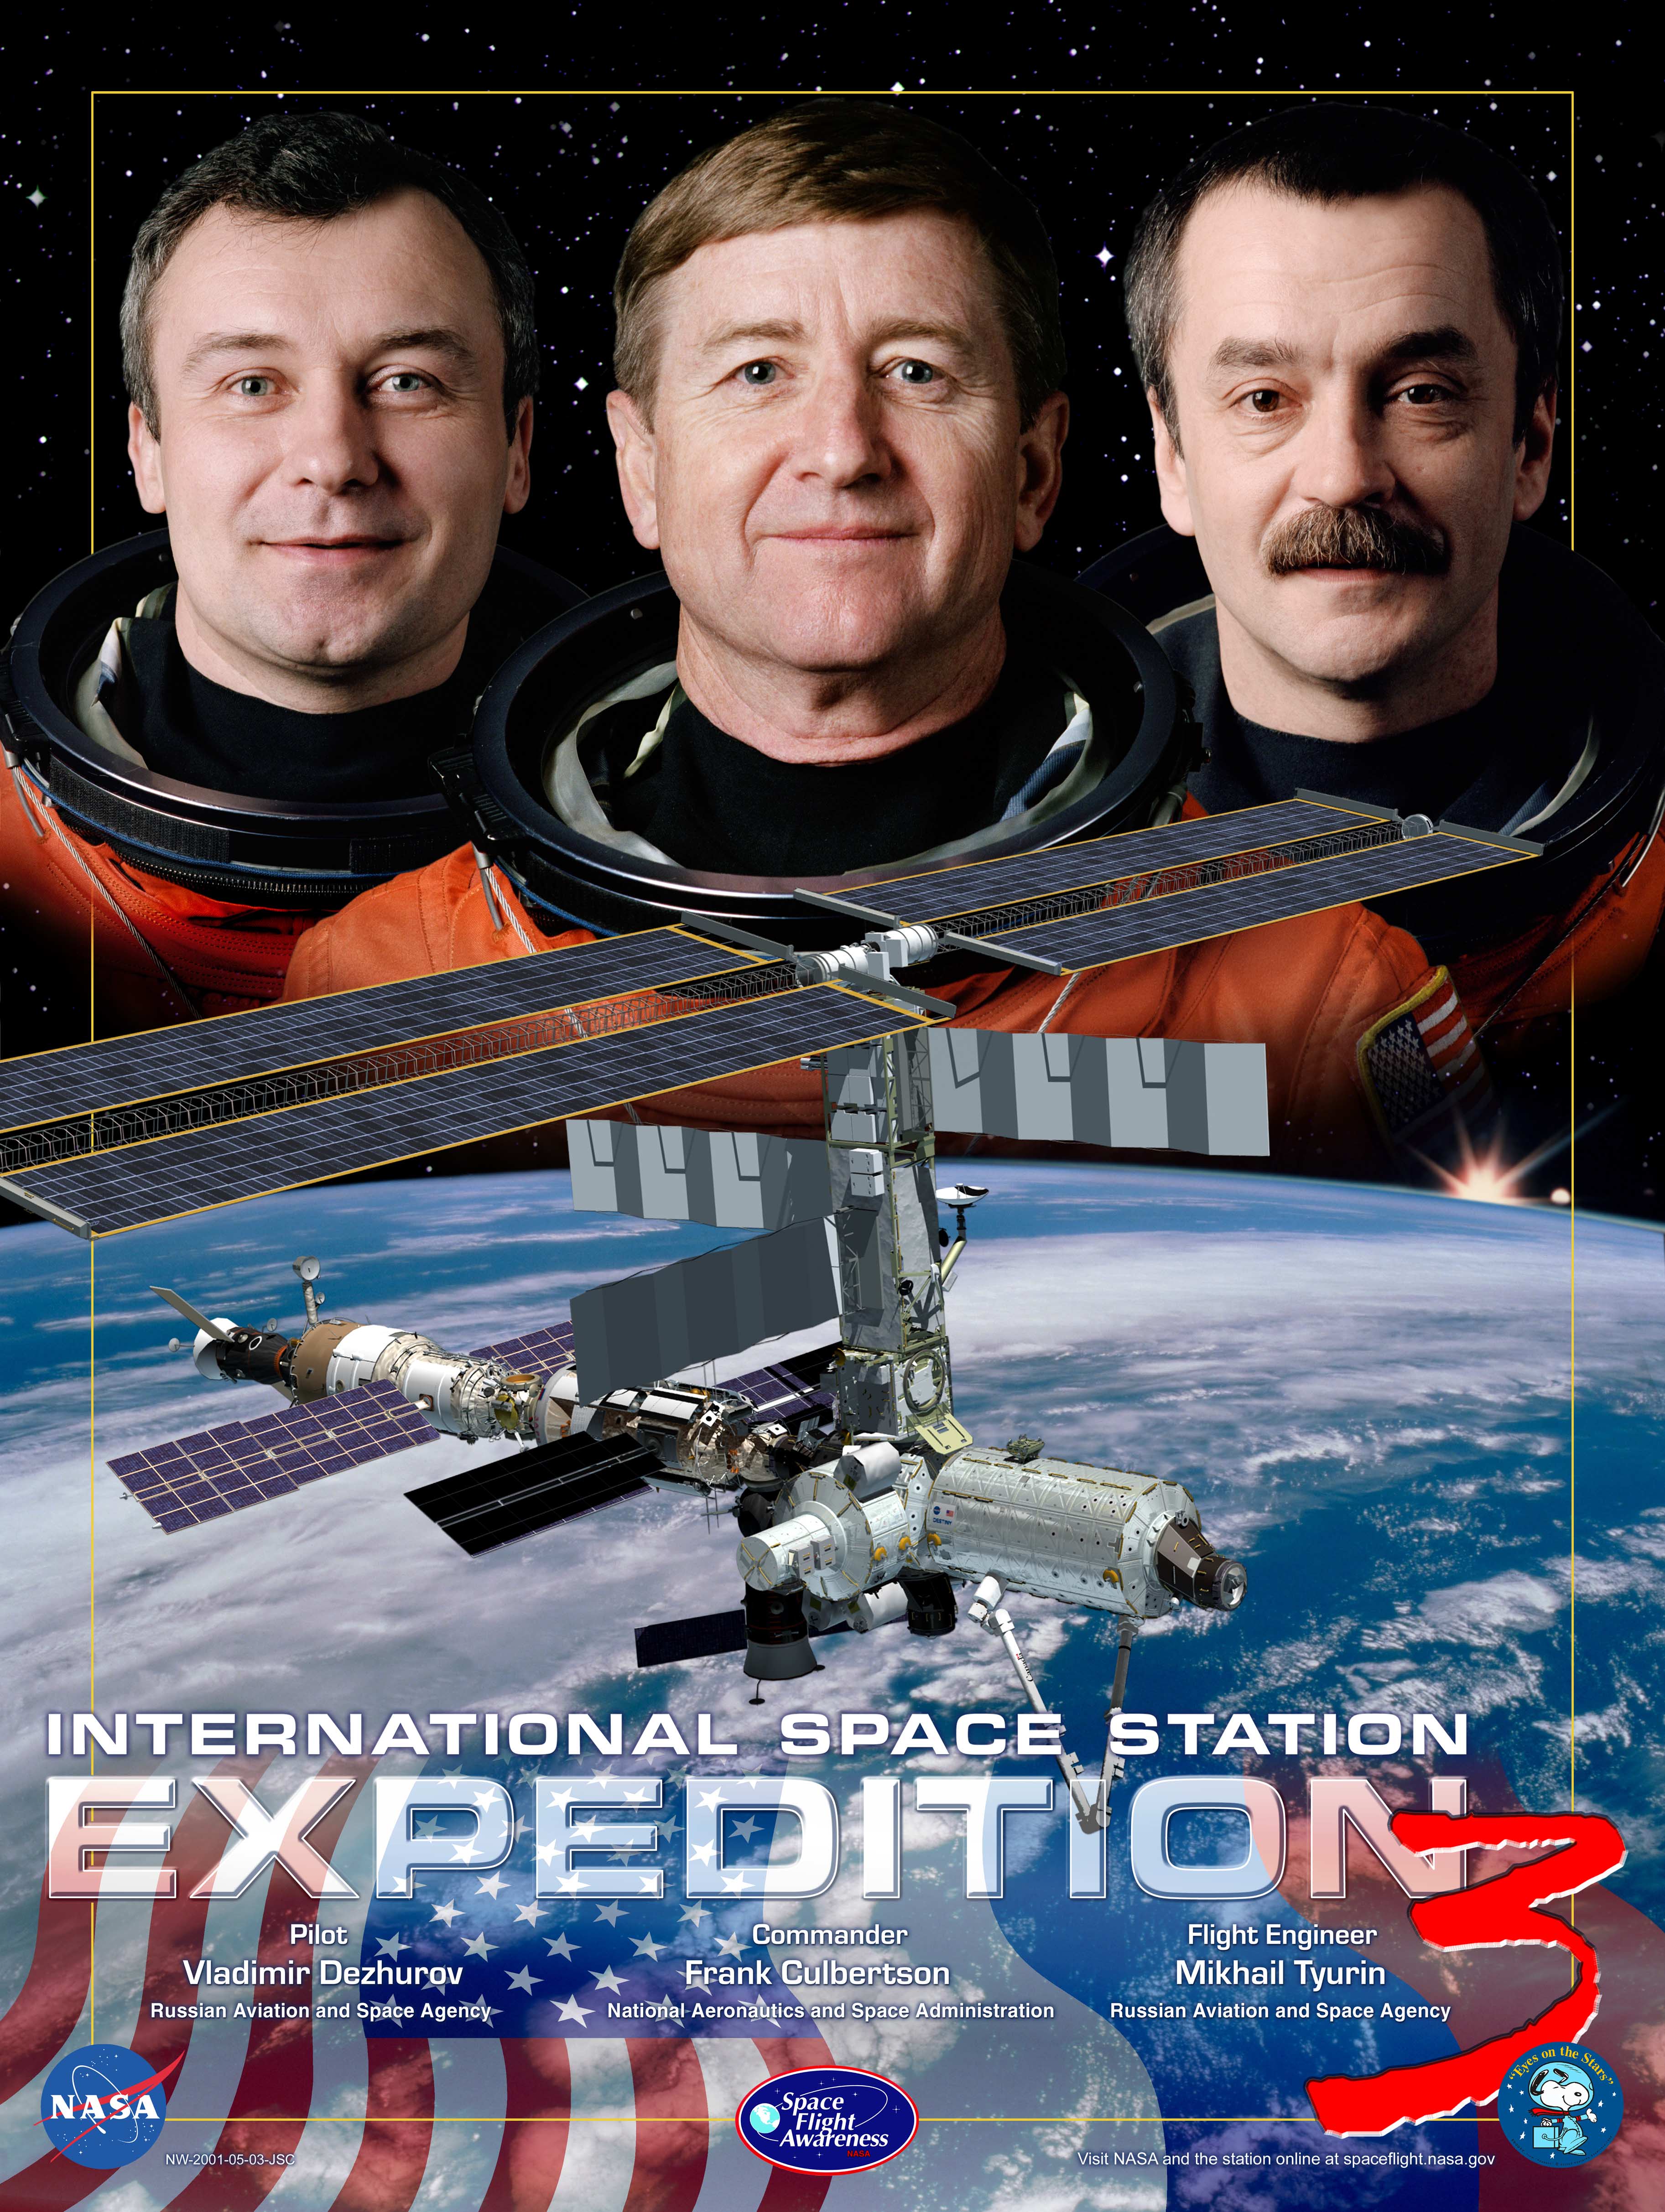 Expedition 3 crew poster